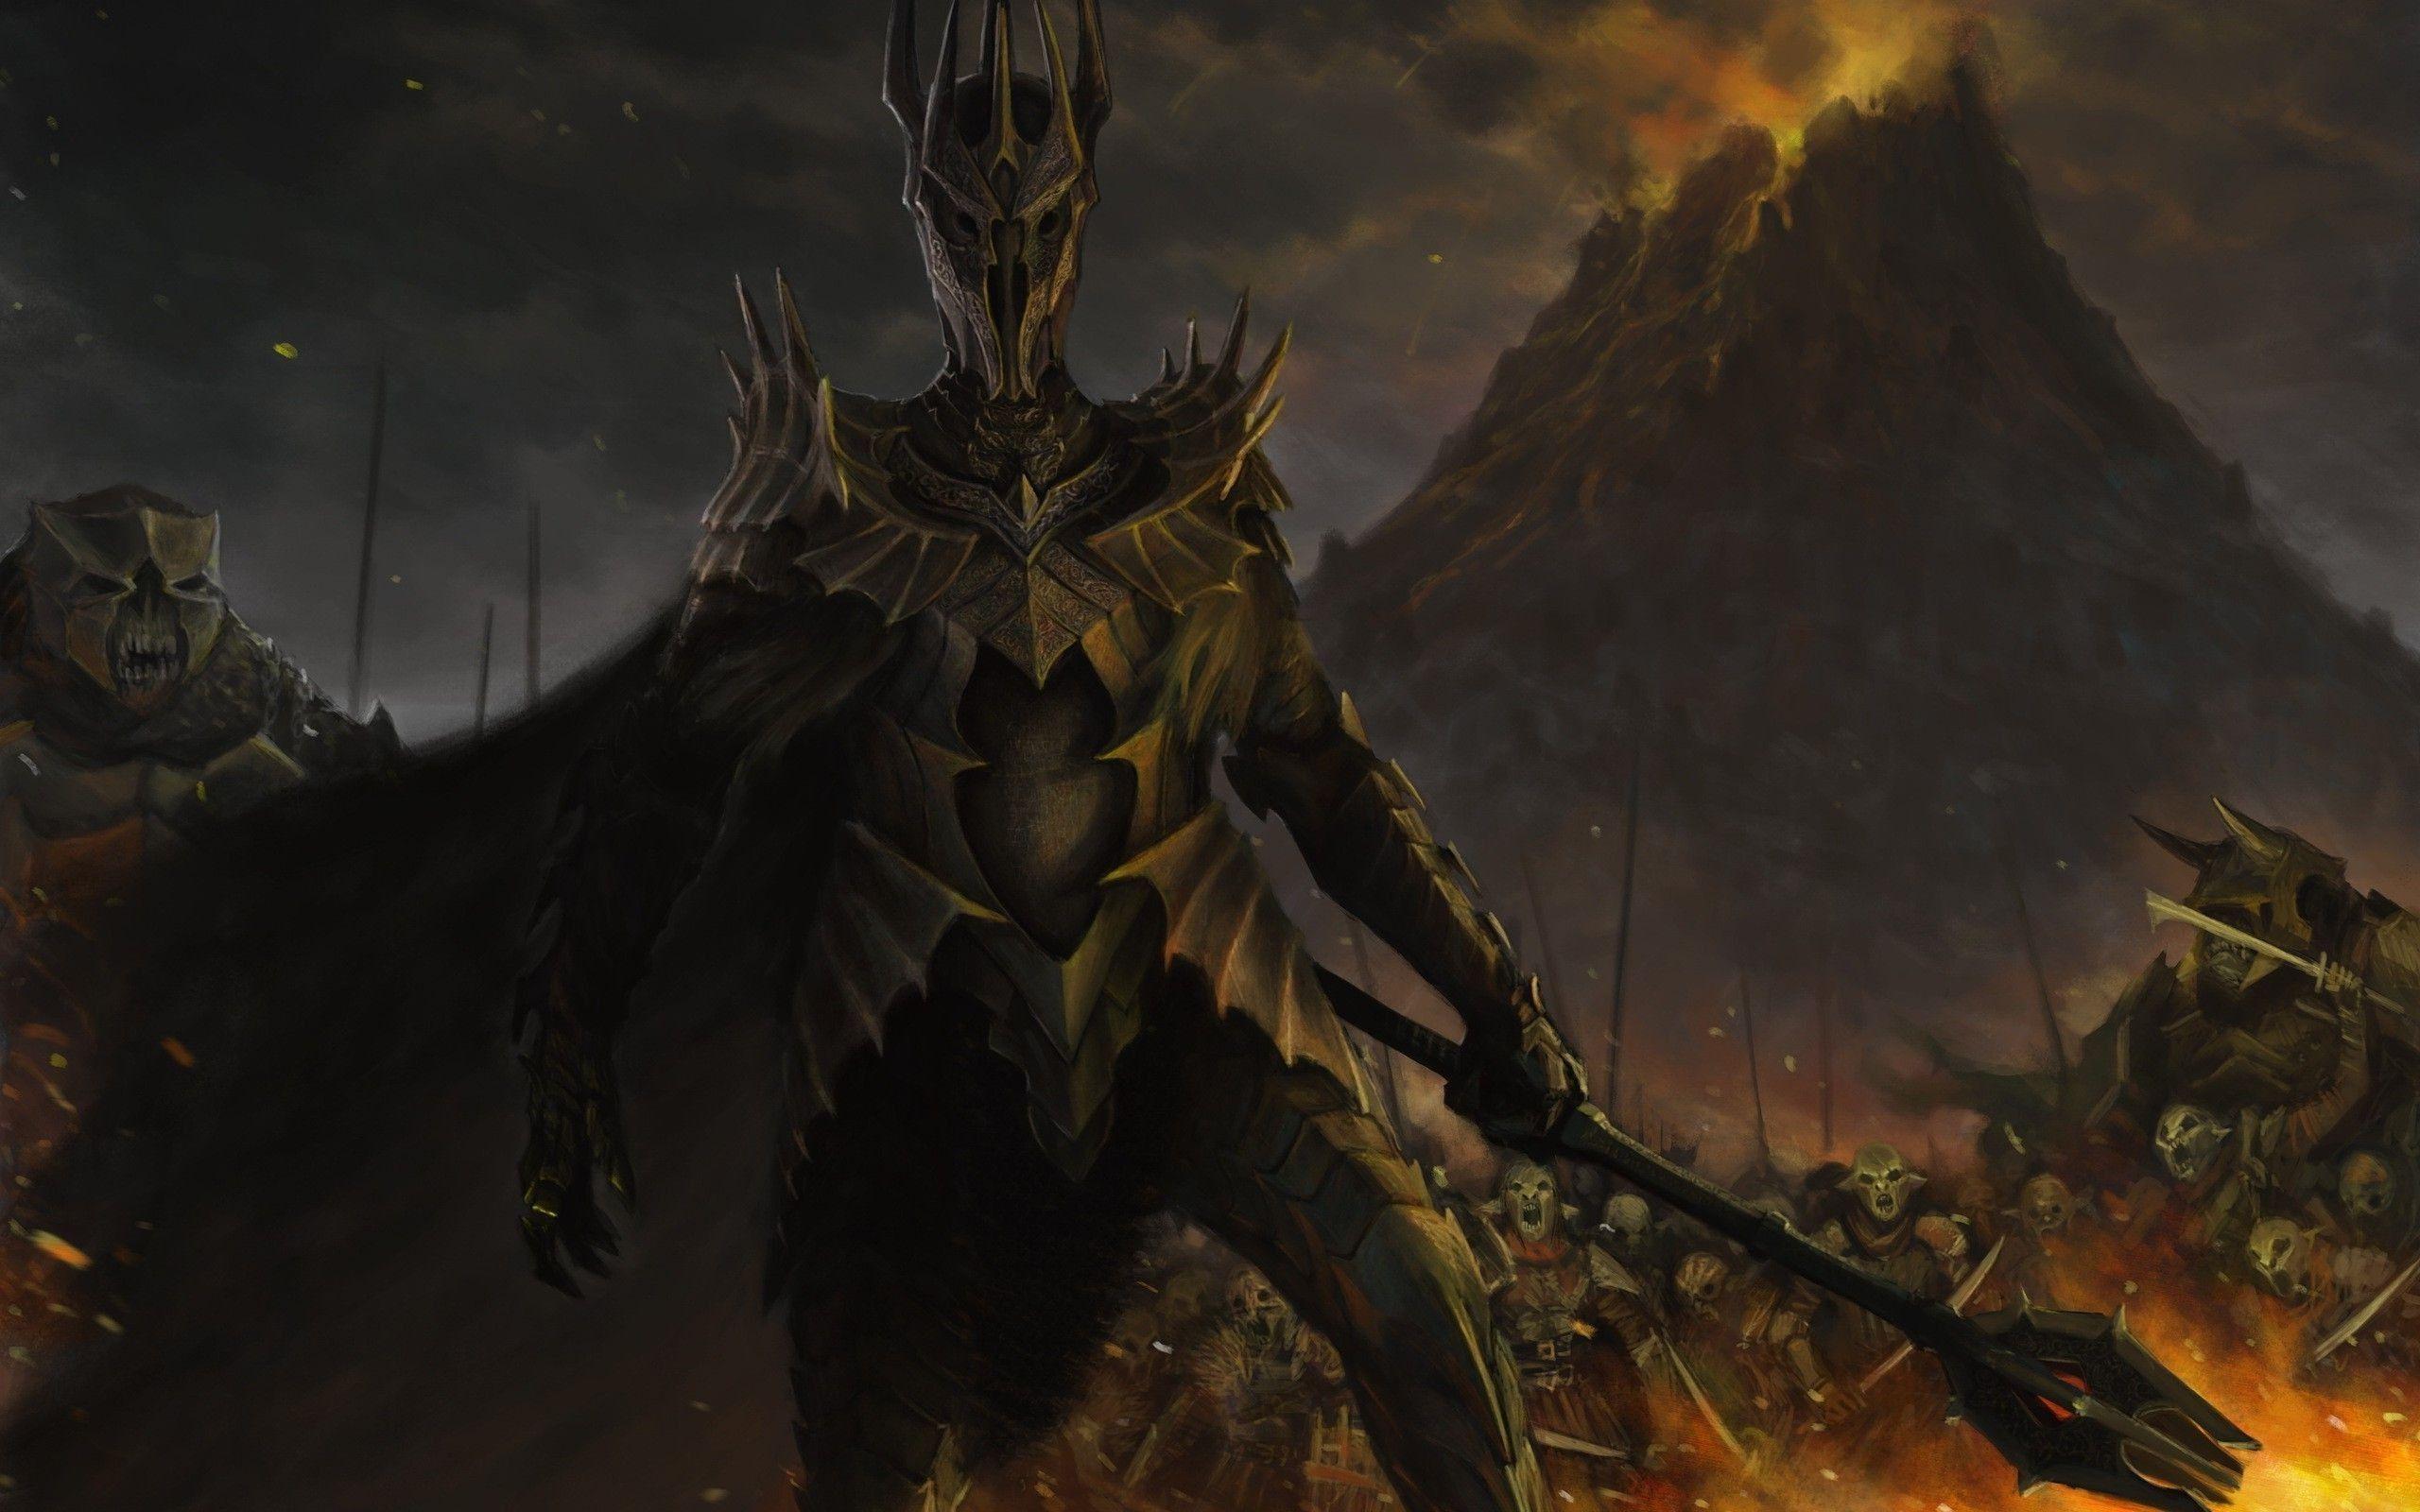 Wallpaper, 2560x1600 px, Sauron, The Lord of the Rings 2560x1600